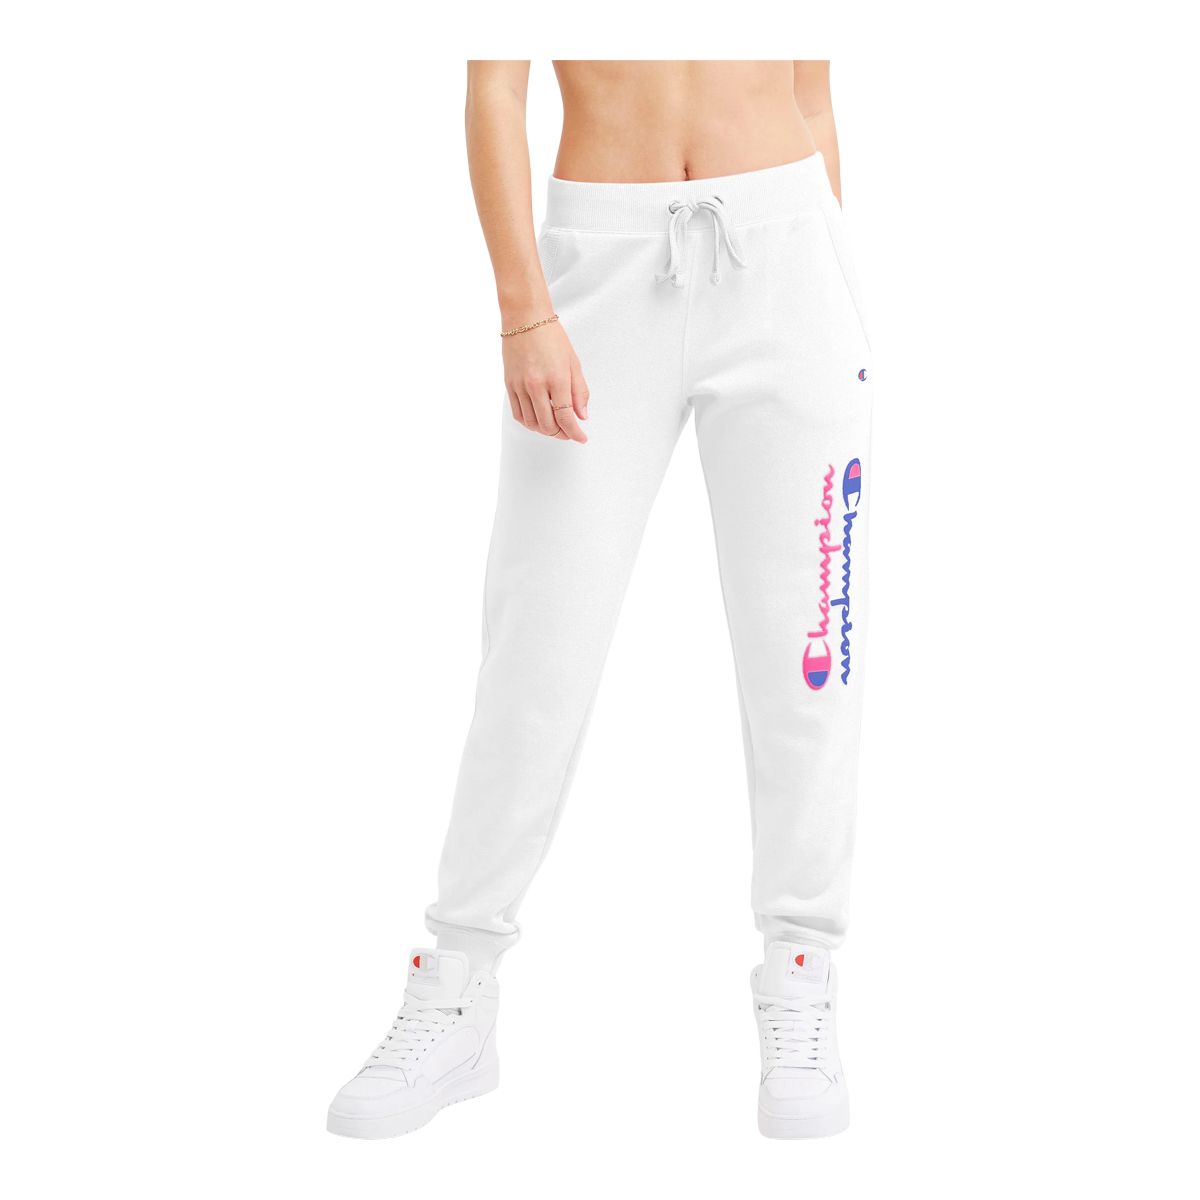 Buy Powerblend Joggers (4-6X) Girls Bottoms from Champion. Find Champion  fashion & more at